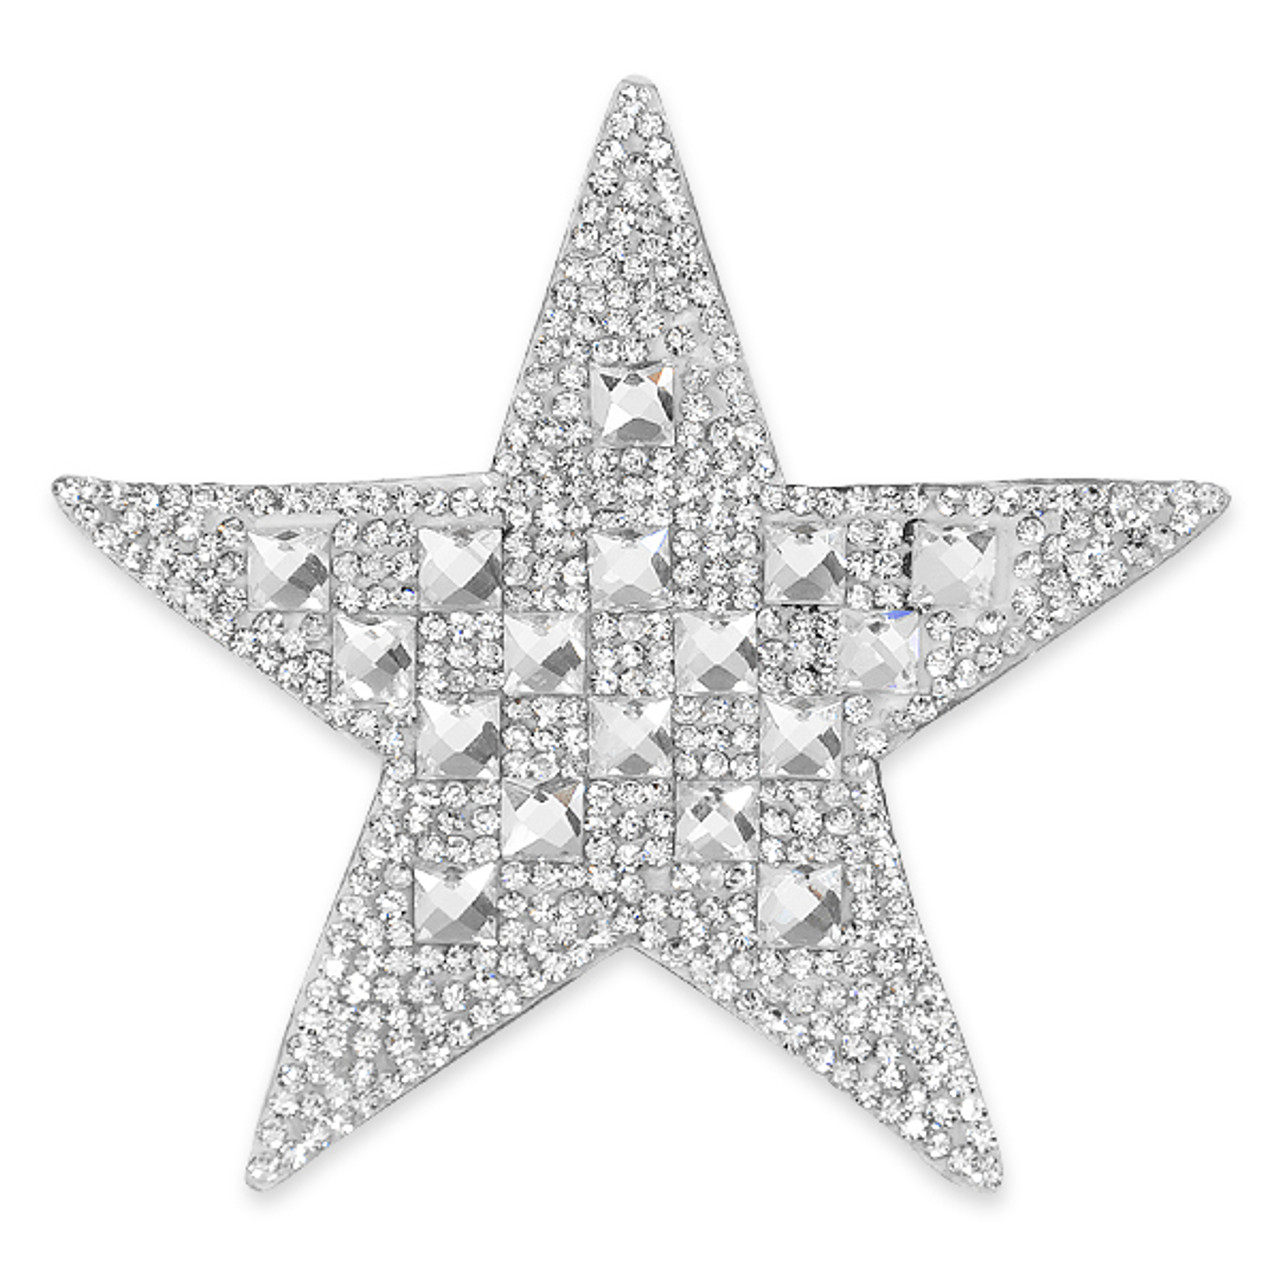 Shop Celestial Charm with Stars Embroidered Patches